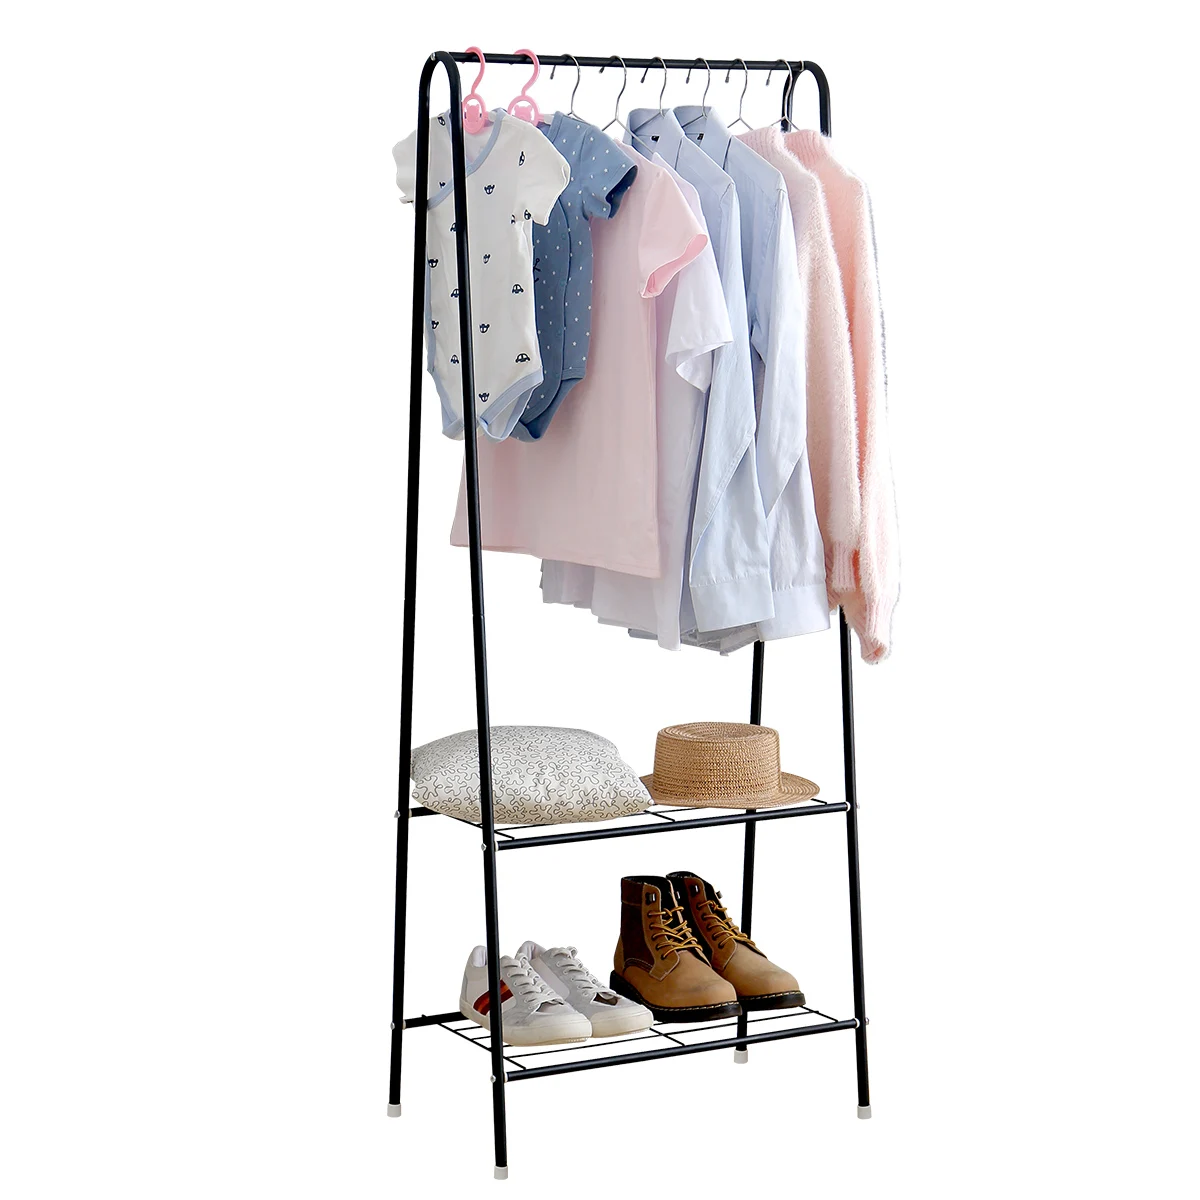 

ORZ0361 Clothes Rack Garment Display Rack Coat Hanging Shelf Clothing Stand with Shelves Commercial Wholesale Metal, Black